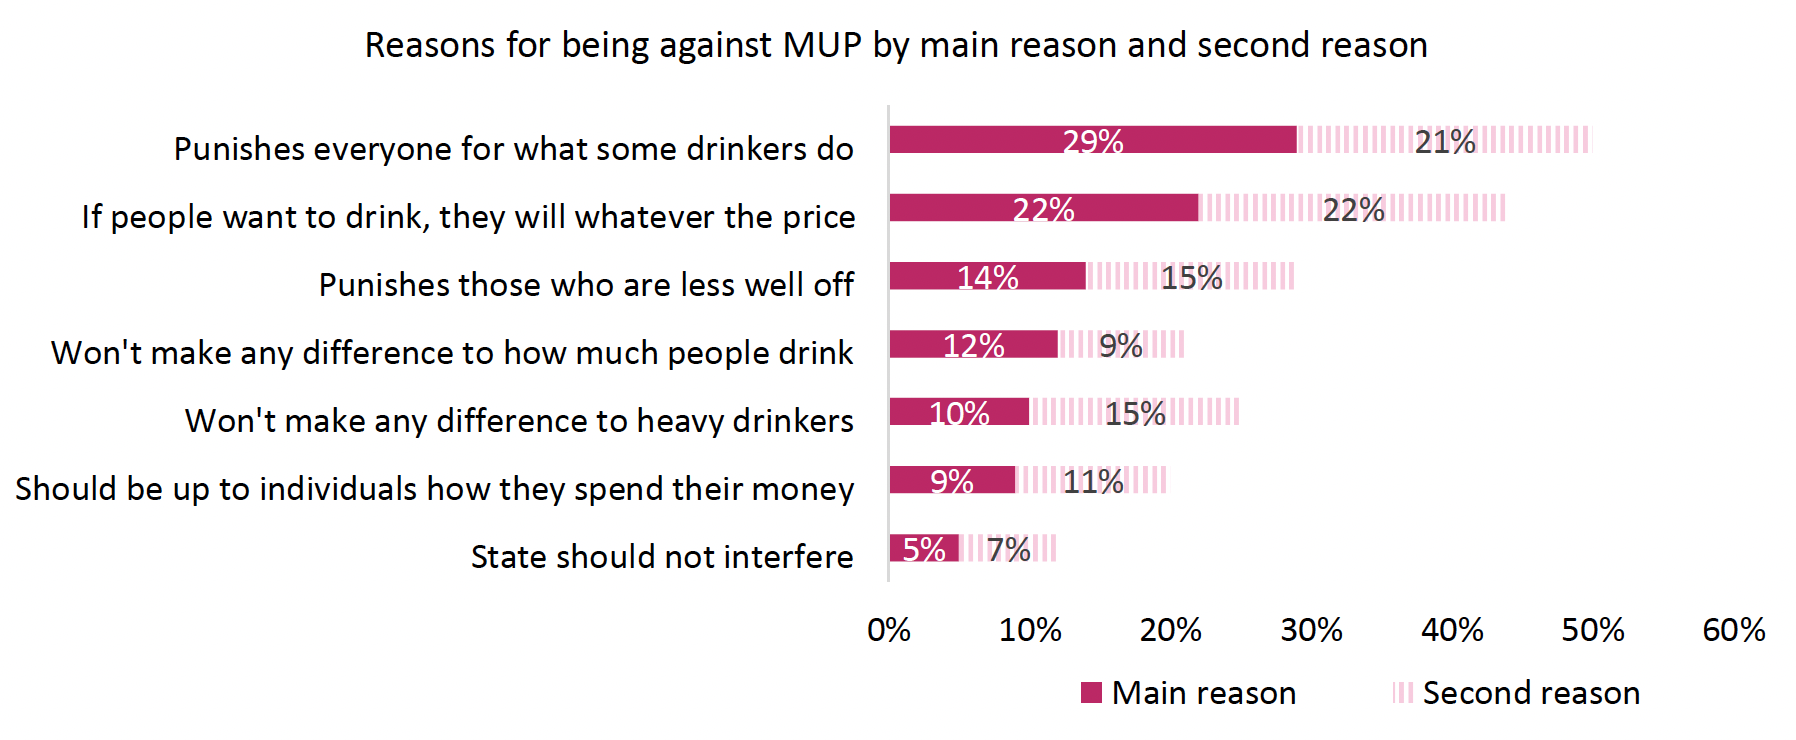 Stacked bar chart showing reasons for being against MUP by main reason and second reason. The most popular main reason and overall reason given is 'Punishes everyone for what some drinkers do', while the most popular second reason given is 'If people want to drink, they will whatever the price'.